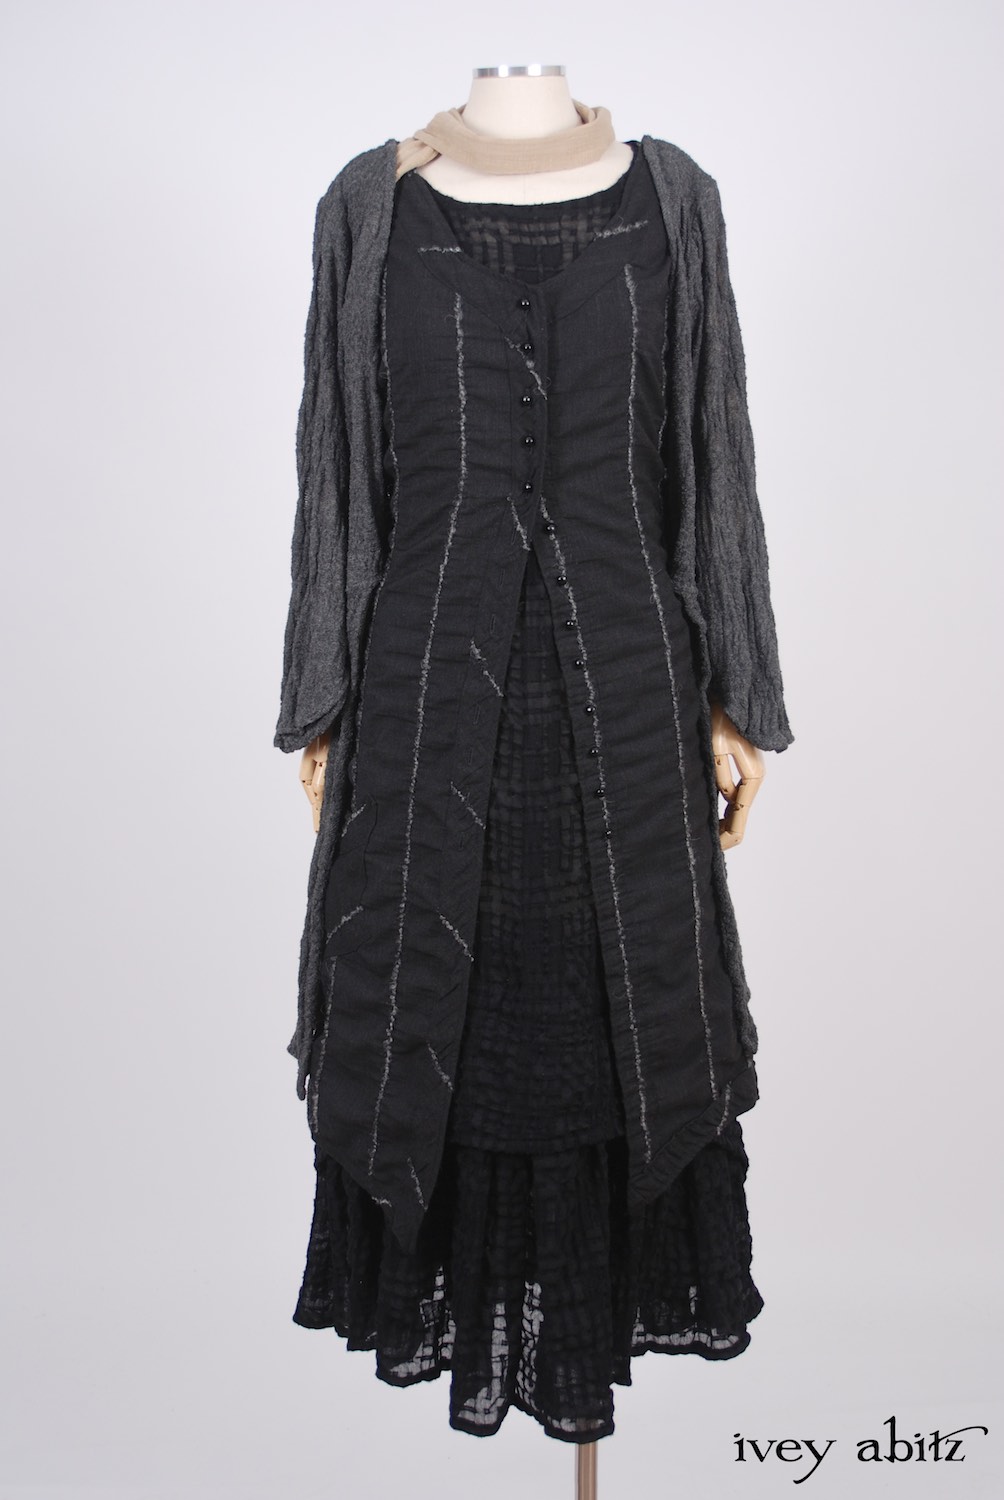 Ivey Abitz - Highbridge Duster Coat in Sparrow Grey Open Weave Knit  - Blanchefleur Sash in Blushed Plaid Voile - Highlands Frock in Blackbird Embroidered Striped Challis - Blanchefleur Frock in Blackbird Plaid Challis - Cilla Slip Frock in Dove Striped Voile, Flood Length